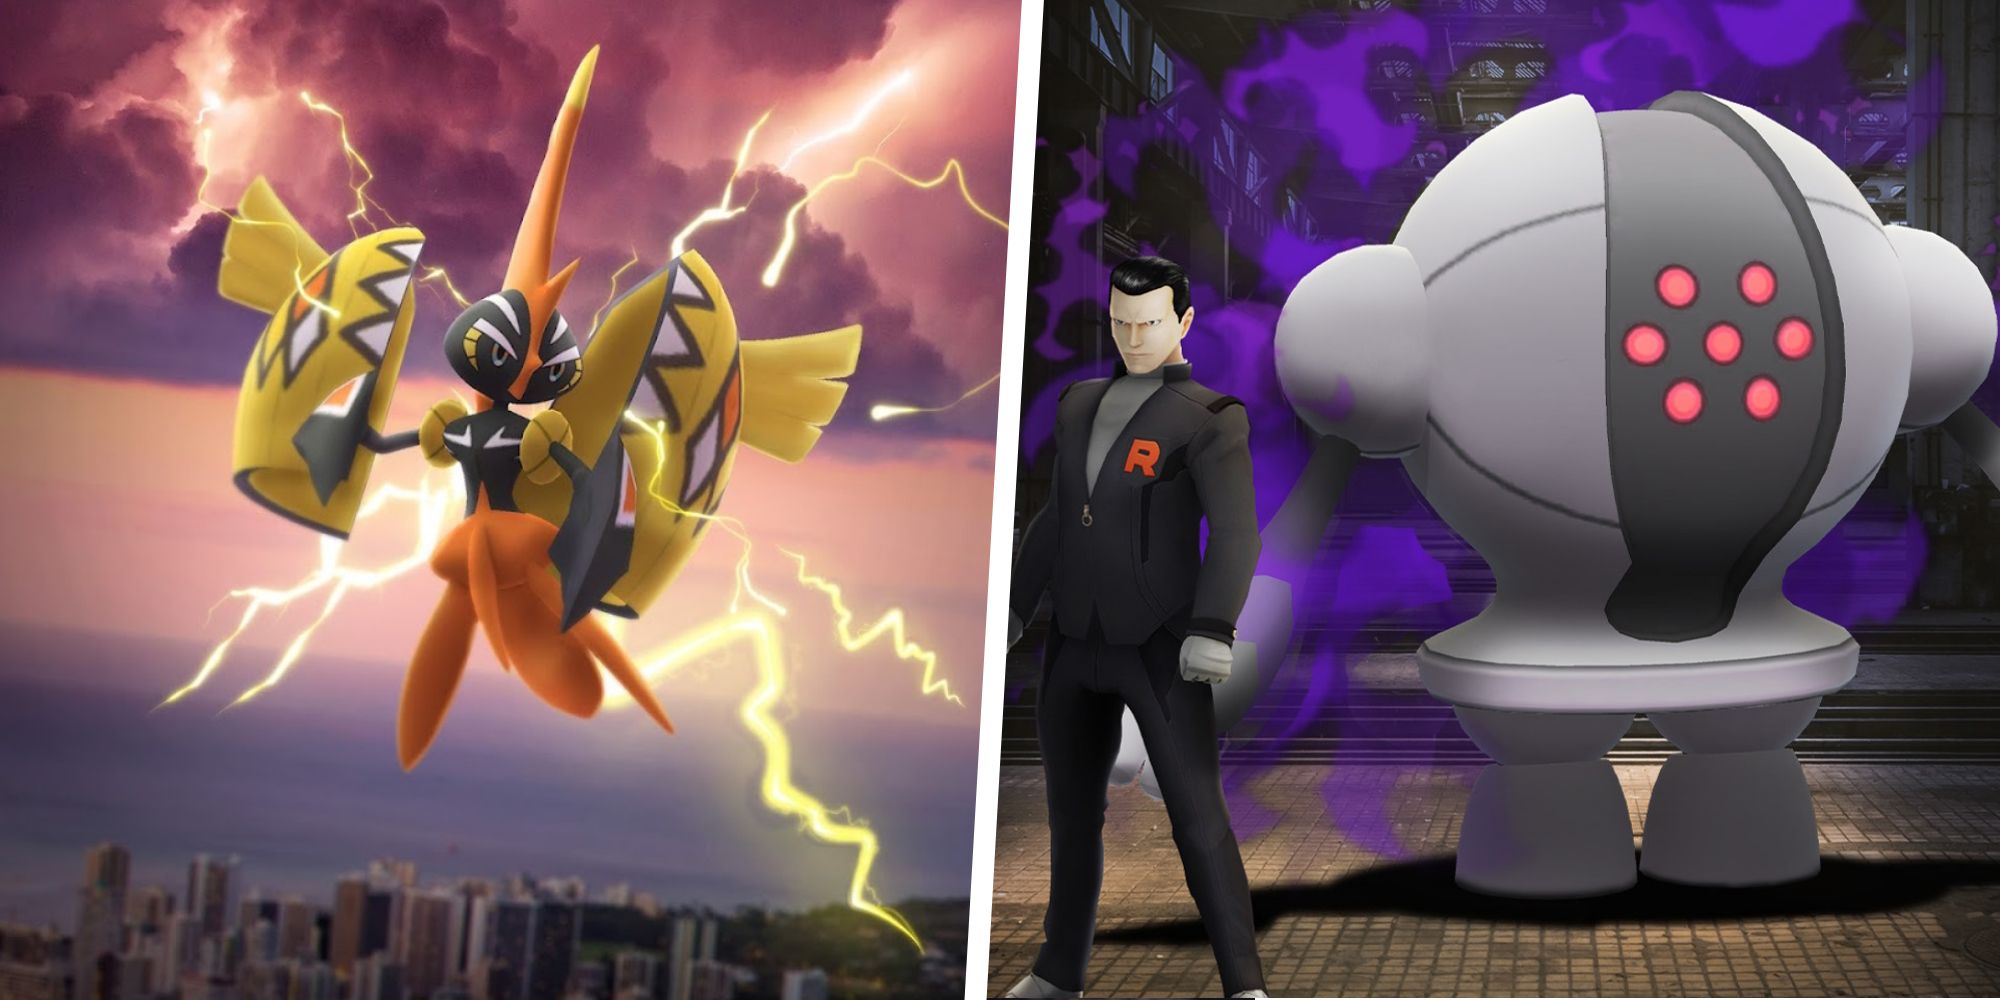 Image of Tapu Koko split with an image of Giovanni standing next to Shadow Registeel